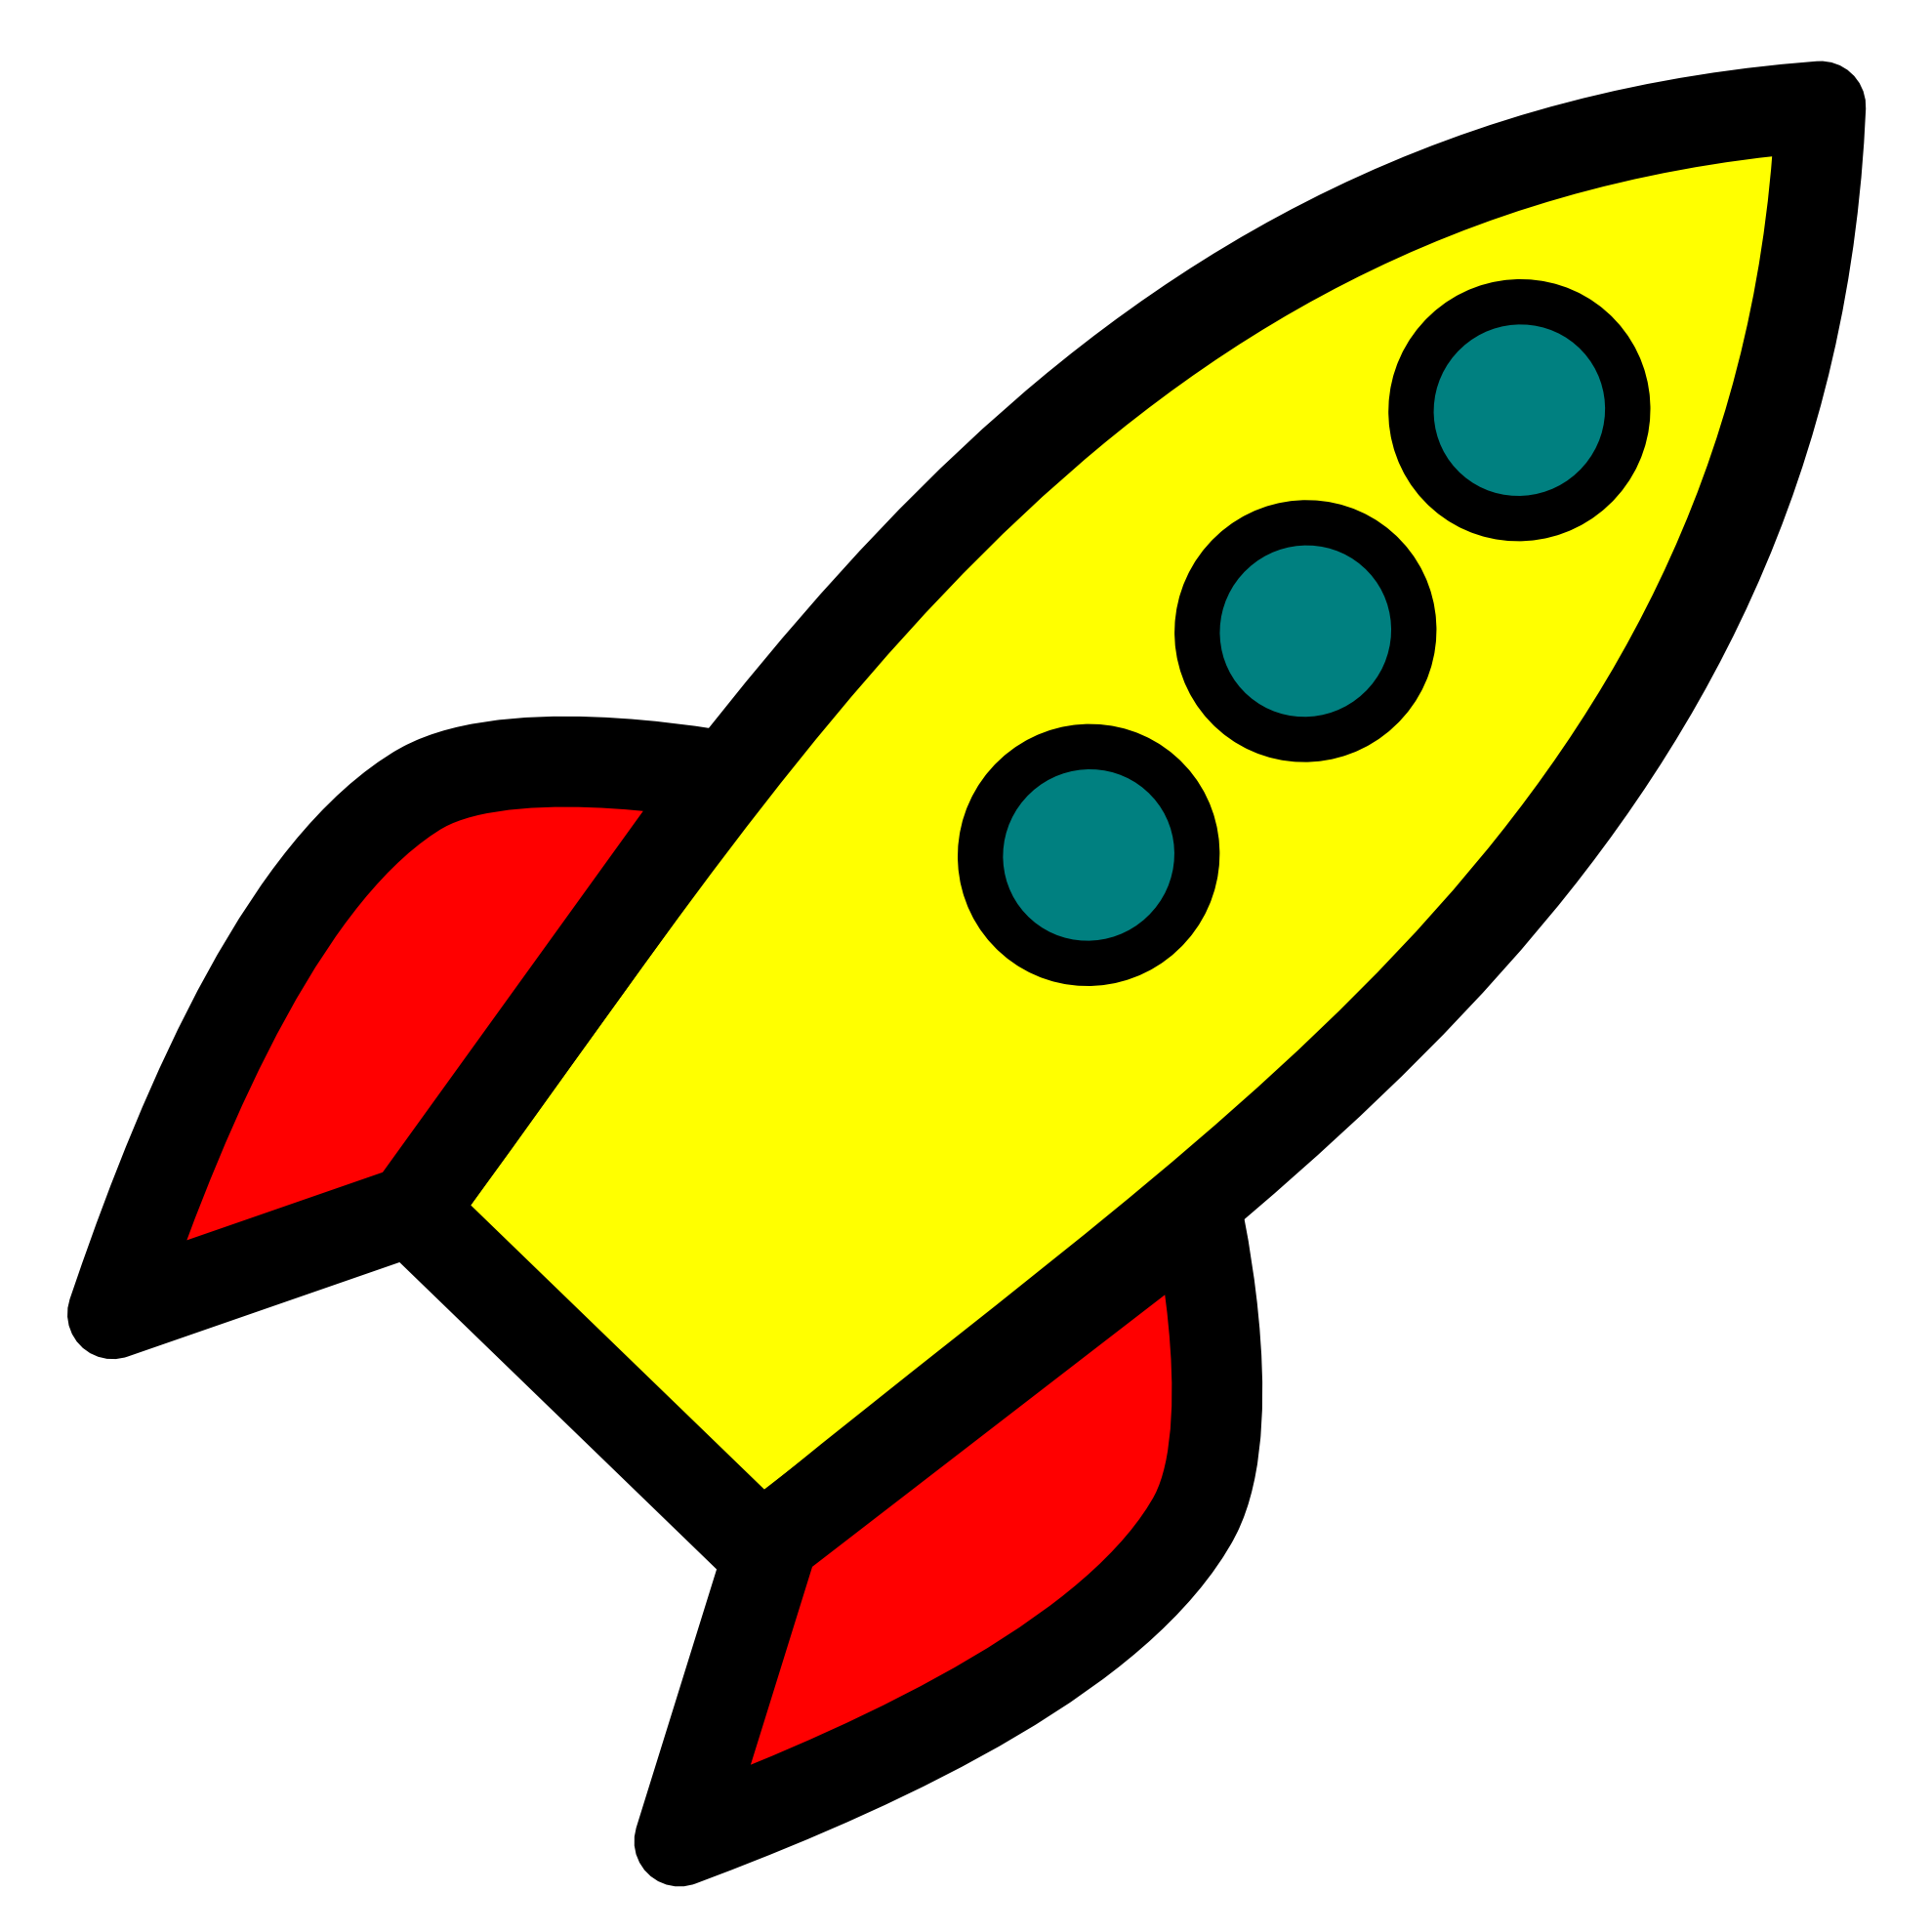 Rocket clip art space on clip art graphics and spaces clipartcow